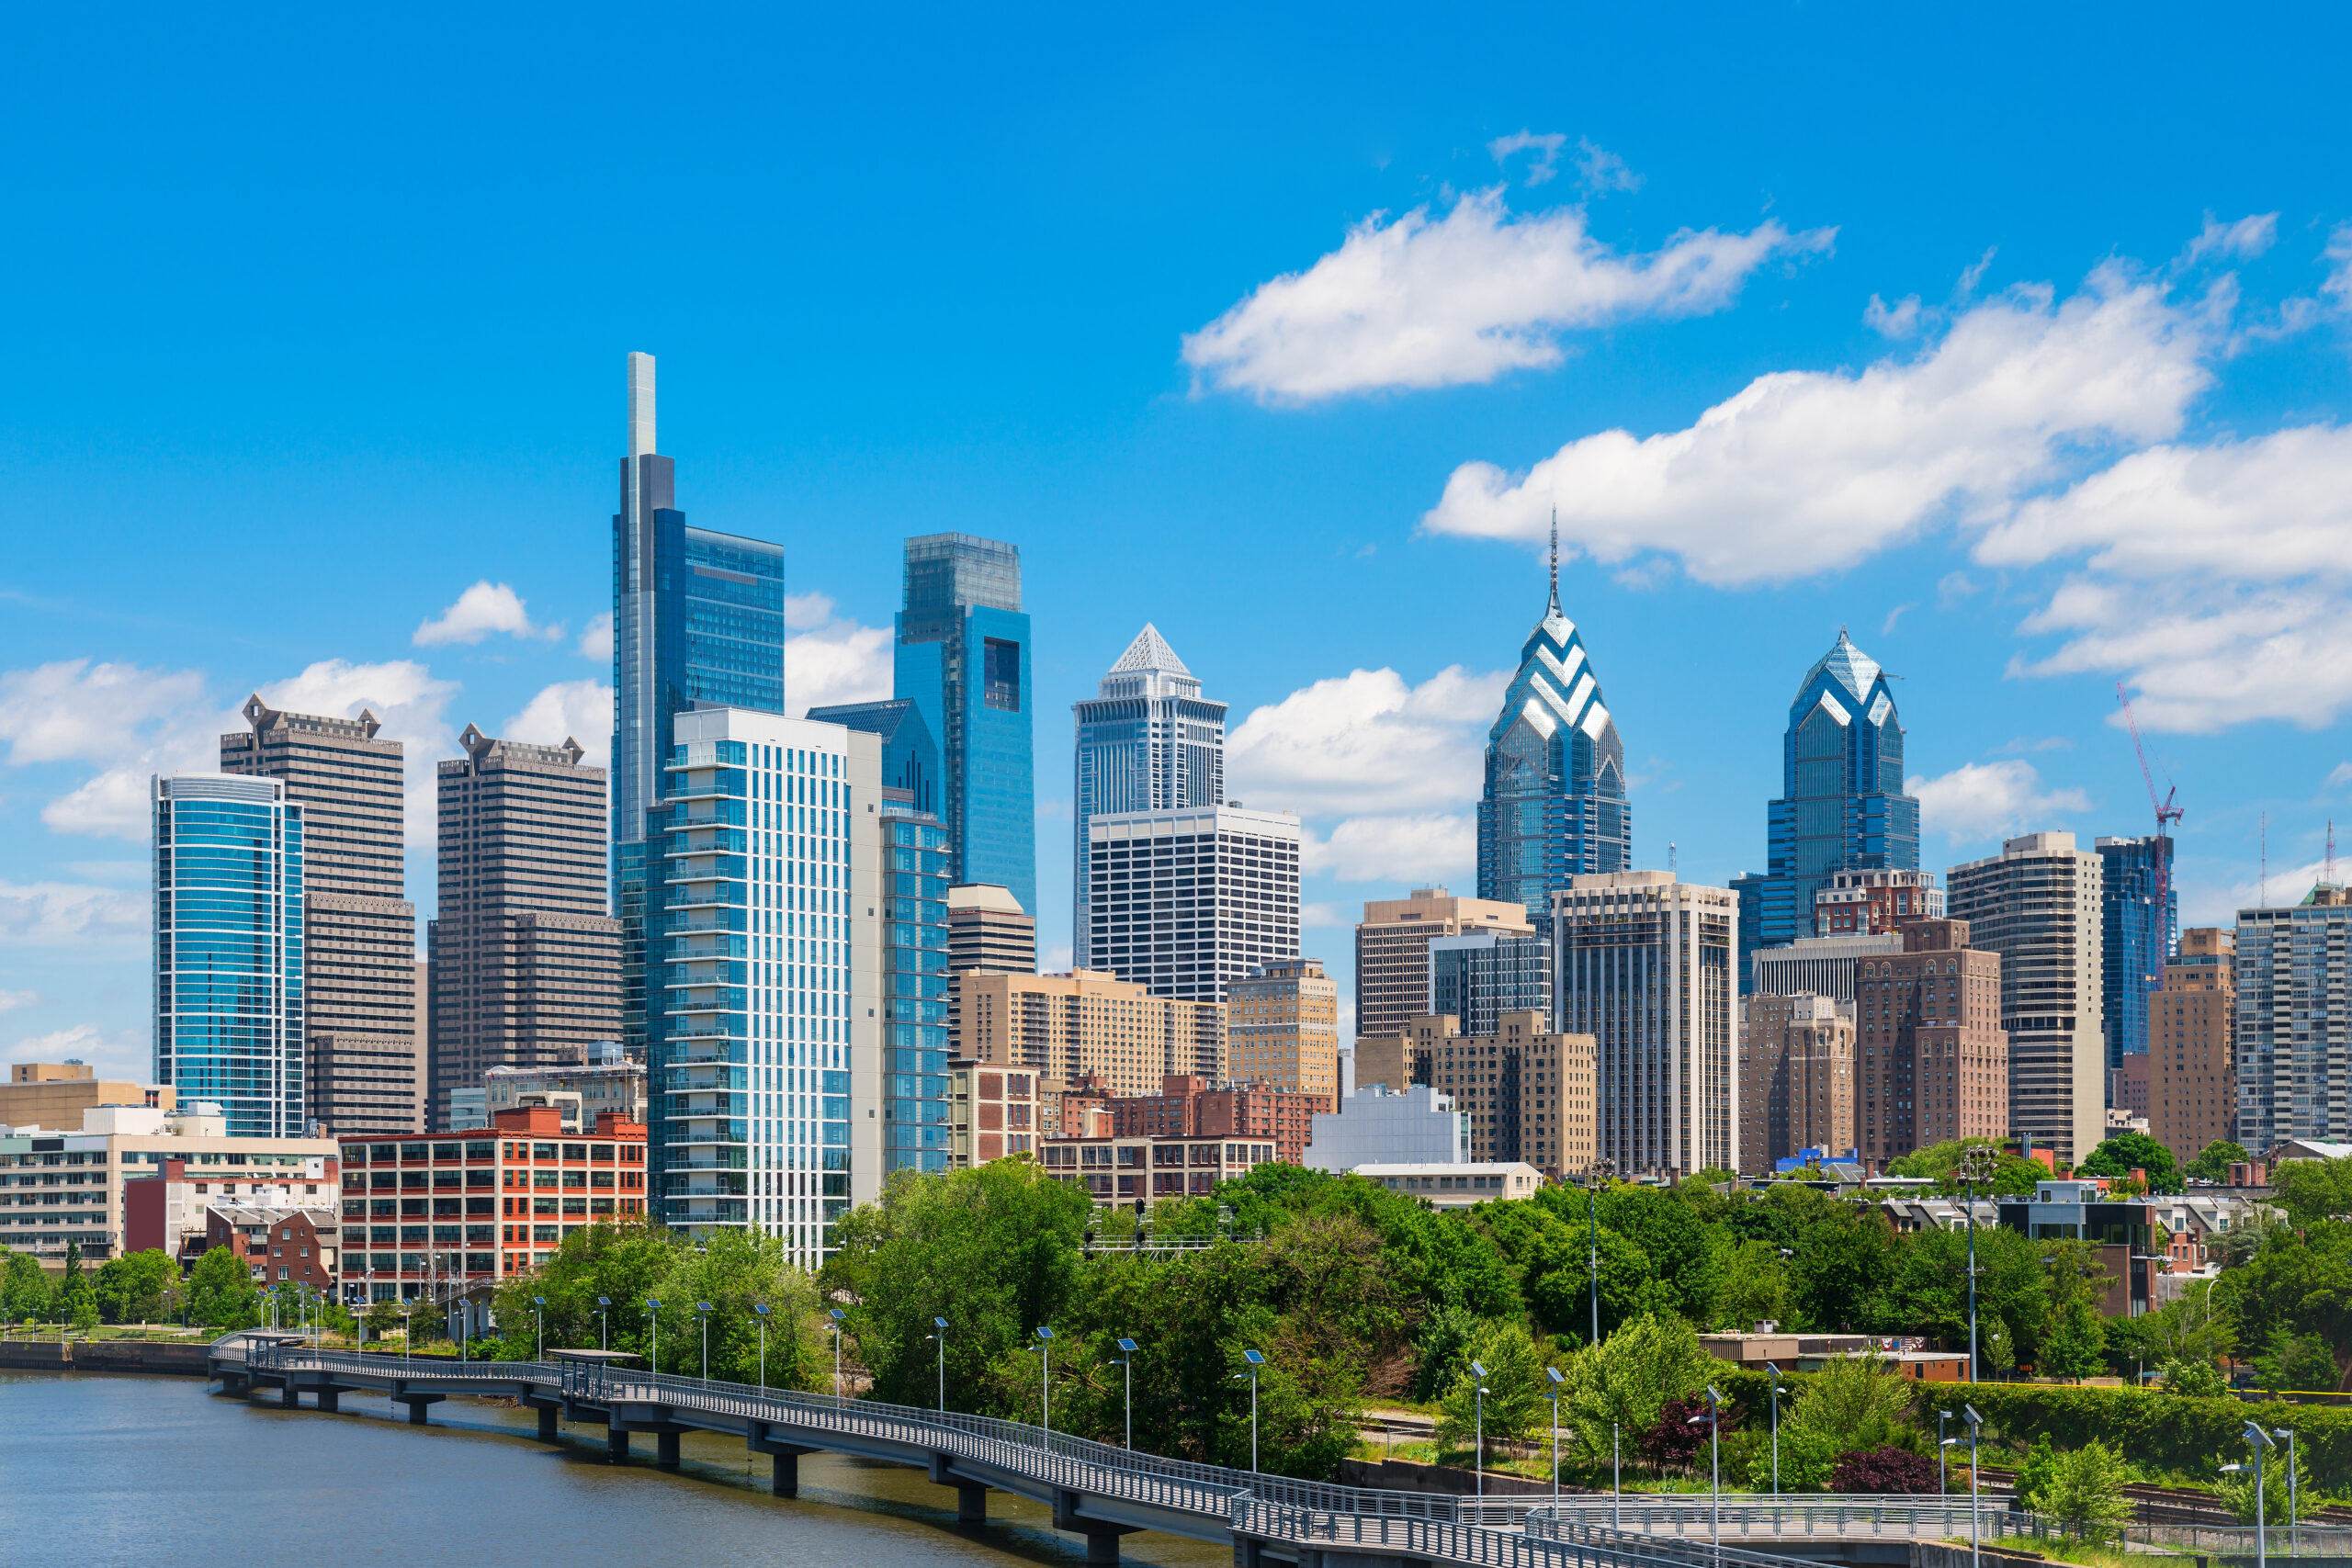 PSD To Provide Building Envelope Water Management Training for Philadelphia Licenses and Inspections